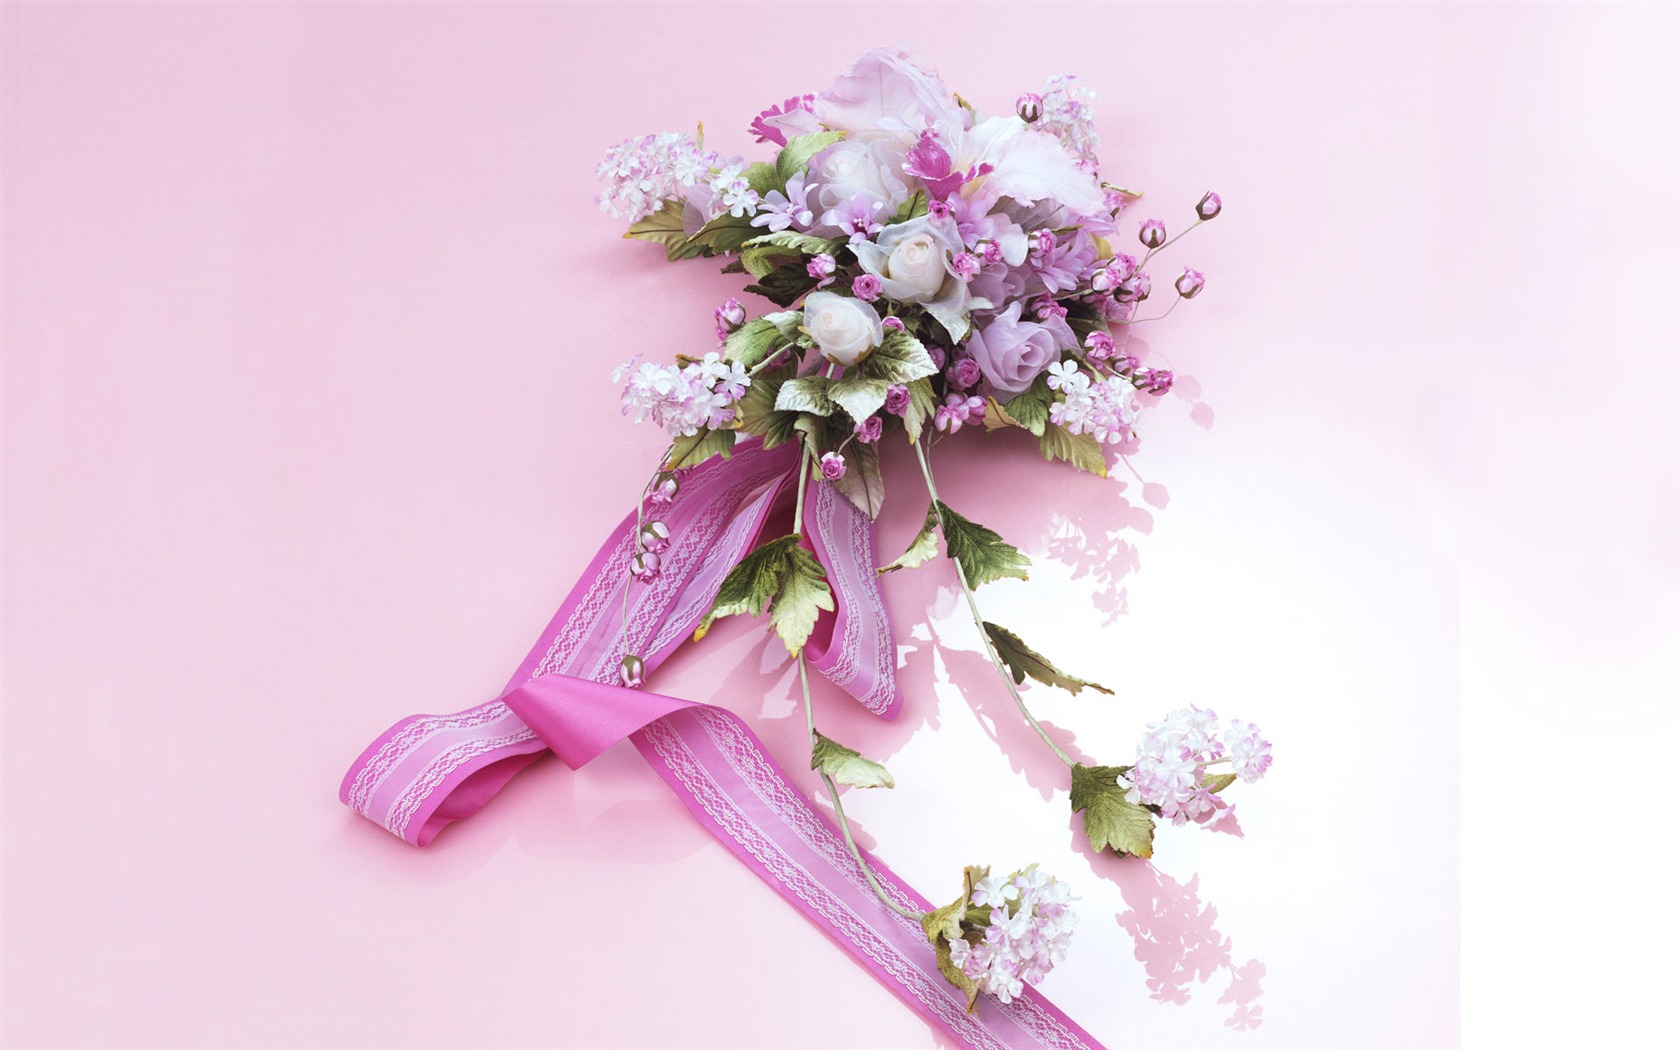 Wedding Flowers items wallpapers (2) #7 - 1680x1050